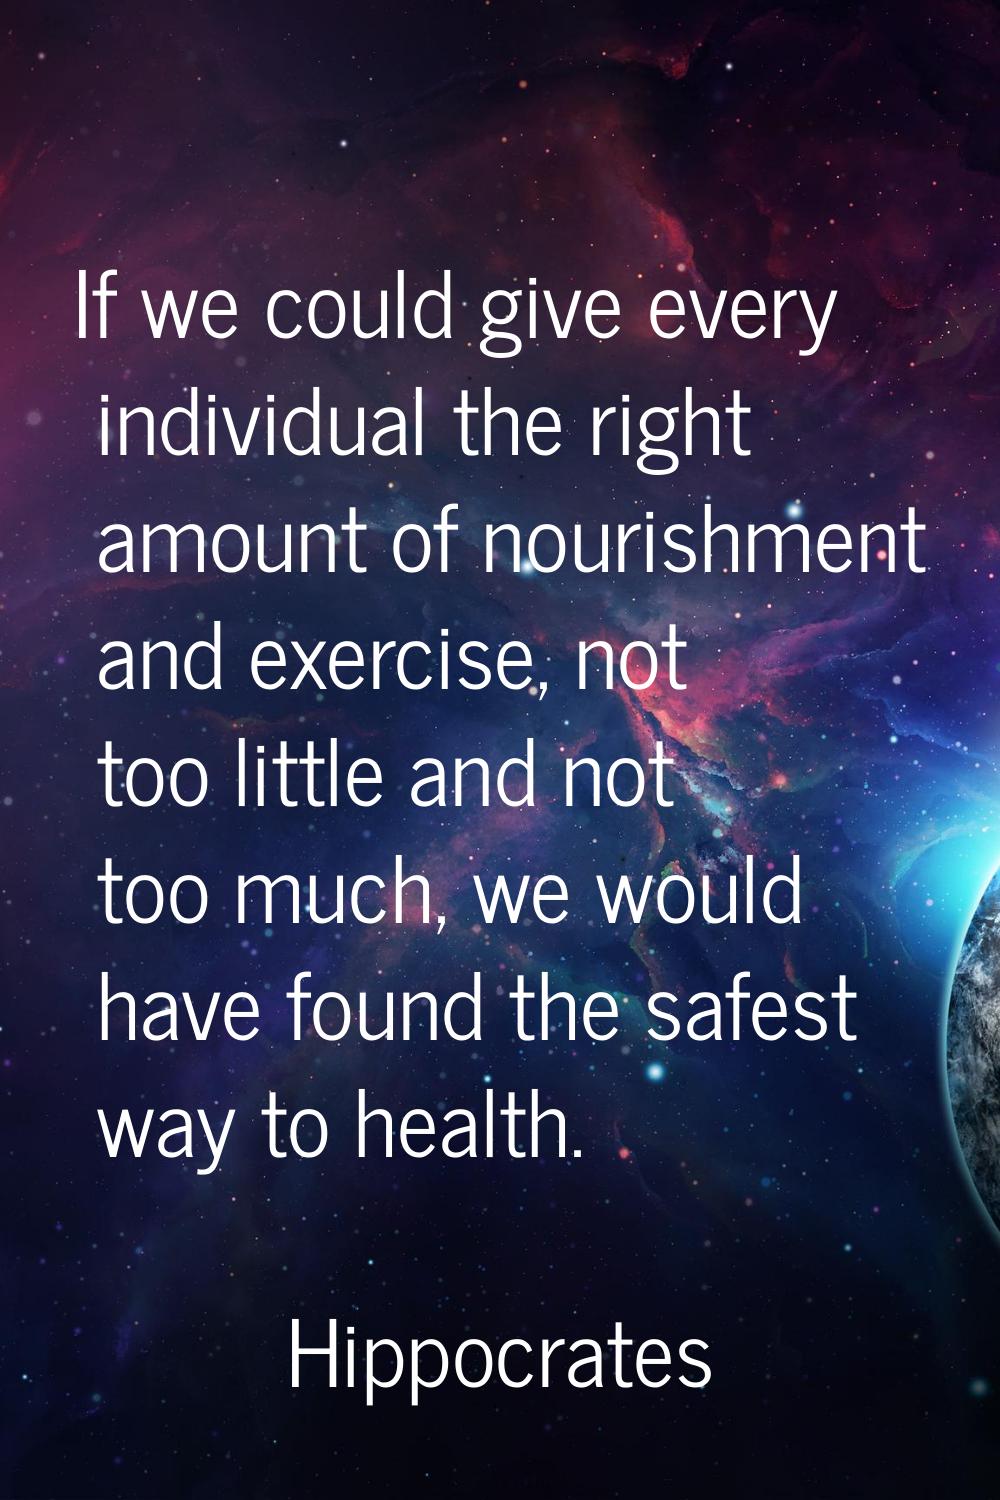 If we could give every individual the right amount of nourishment and exercise, not too little and 